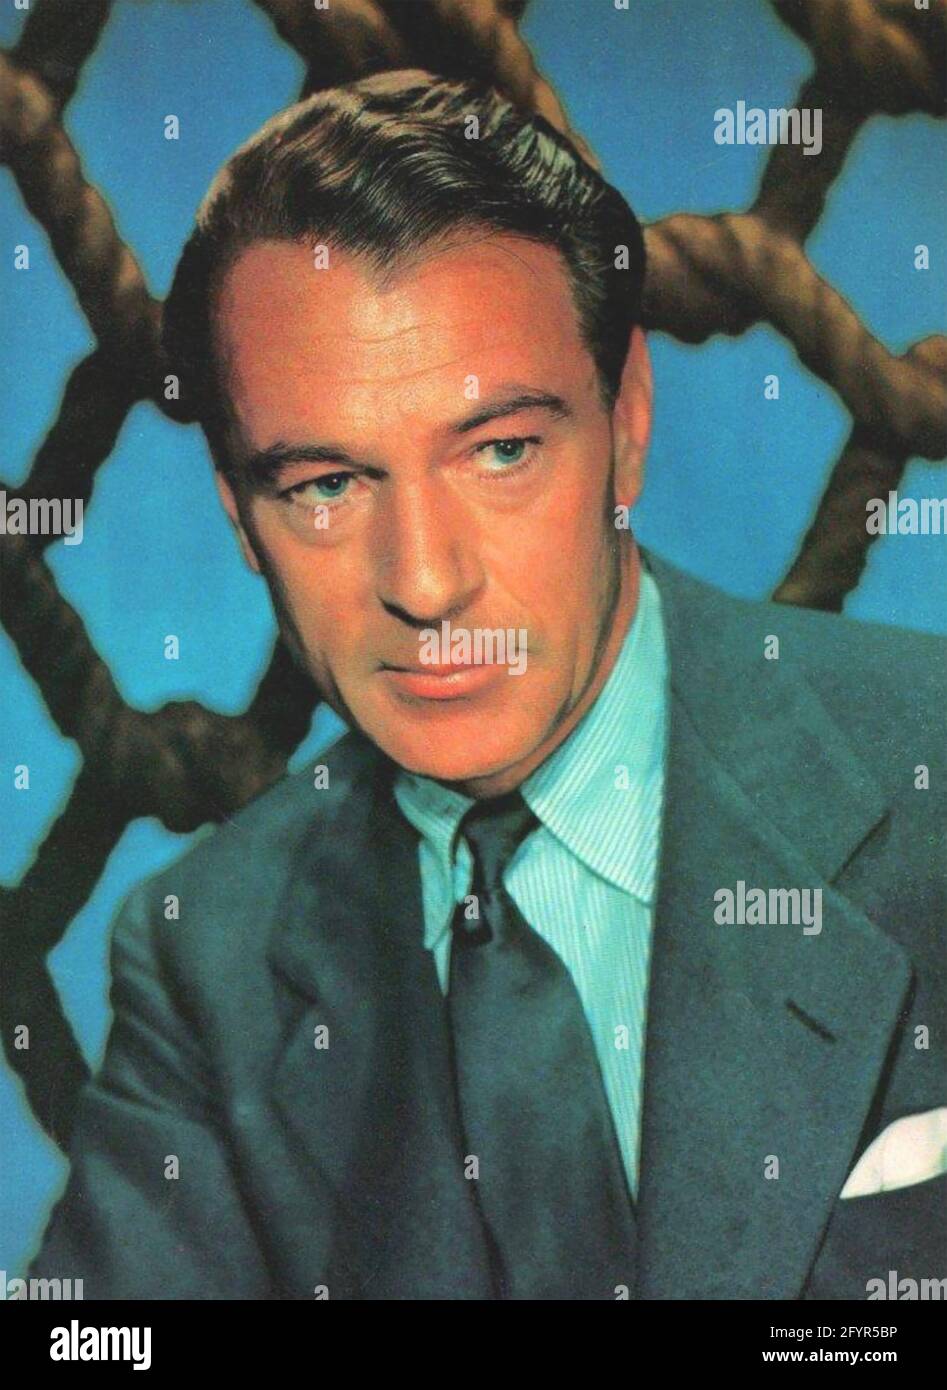 GARY COOPER (1901-1961) American film actor about 1950 Stock Photo